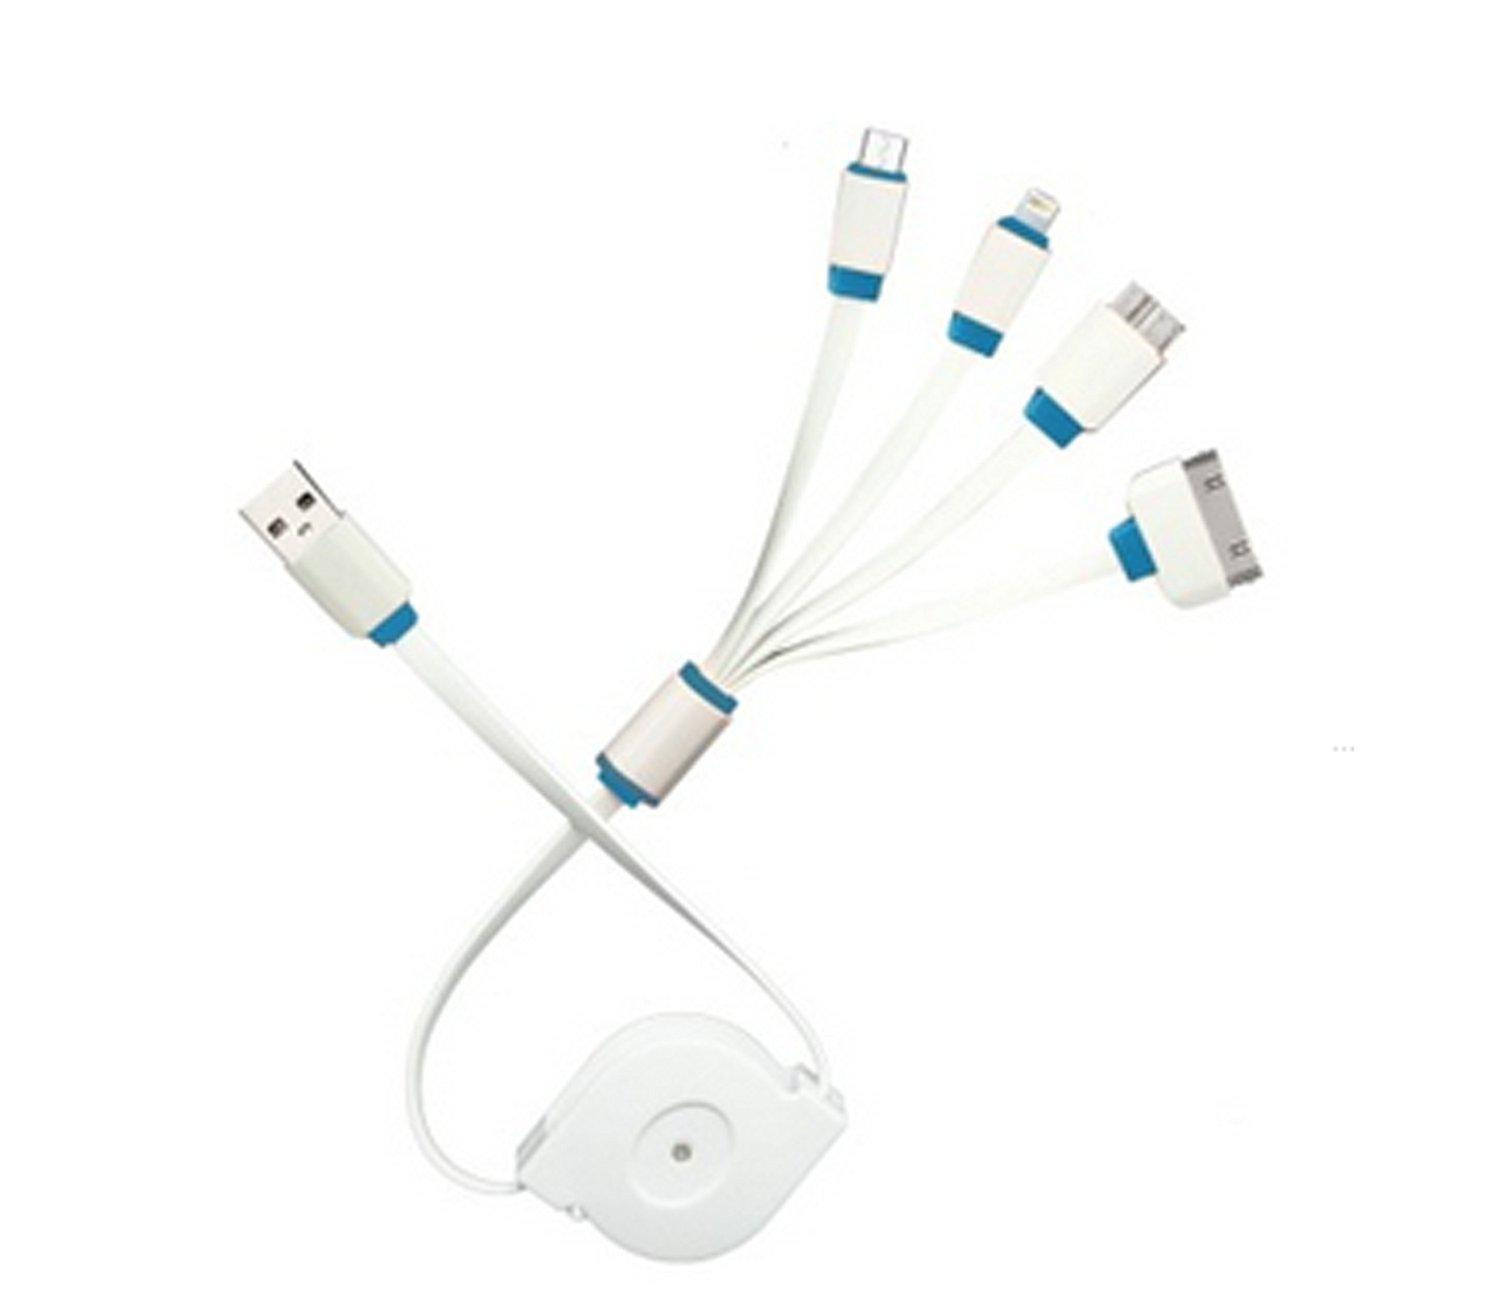 Multi USB töltőkábel adapter 4 az 1-ben  for iphone5 5s 6 6s for Samsung note4 Charging line Multi Charger Cable for tablet